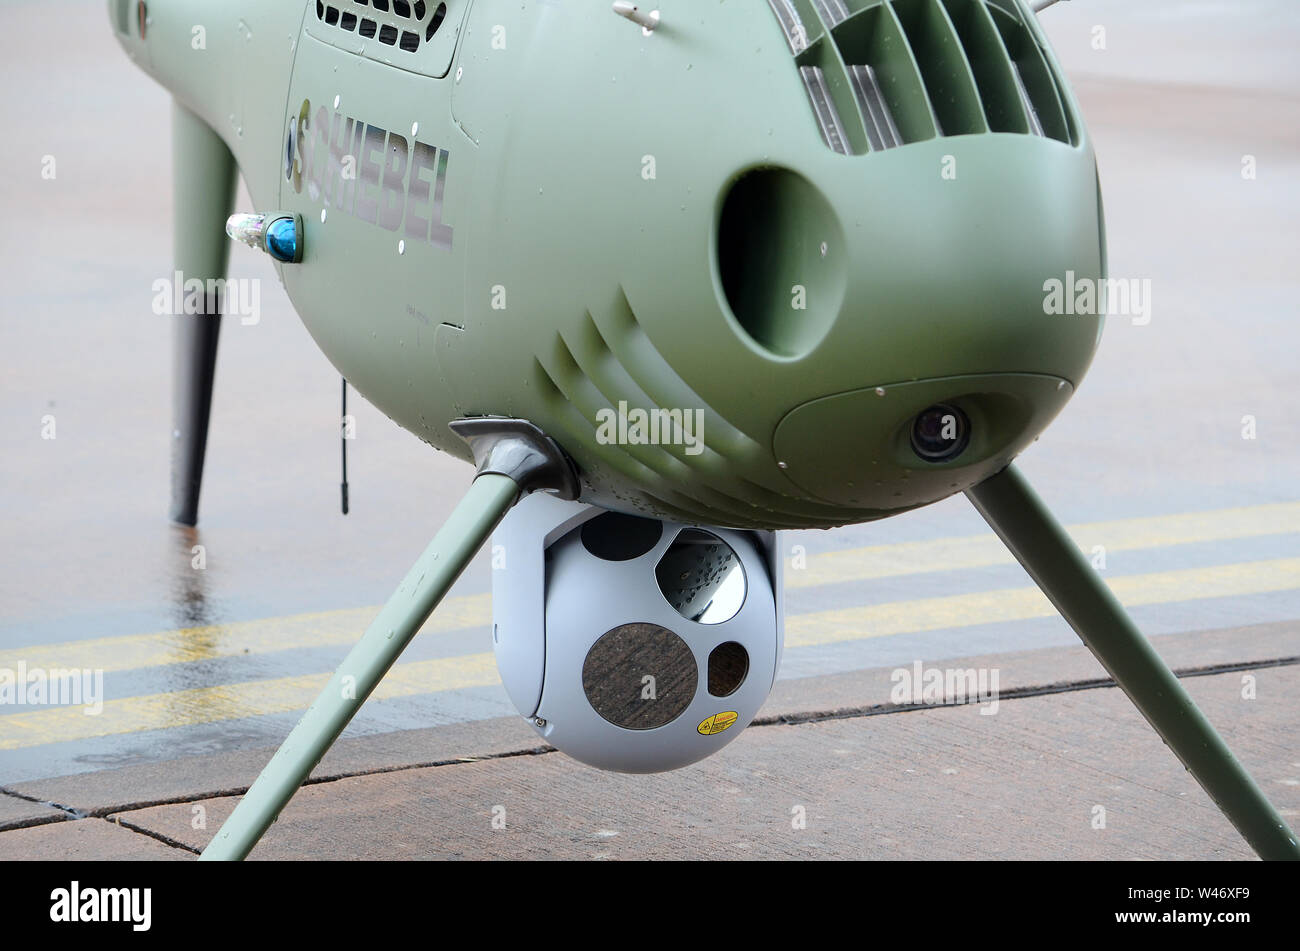 Camcopter S-100, drone militaire, Banque D'Images